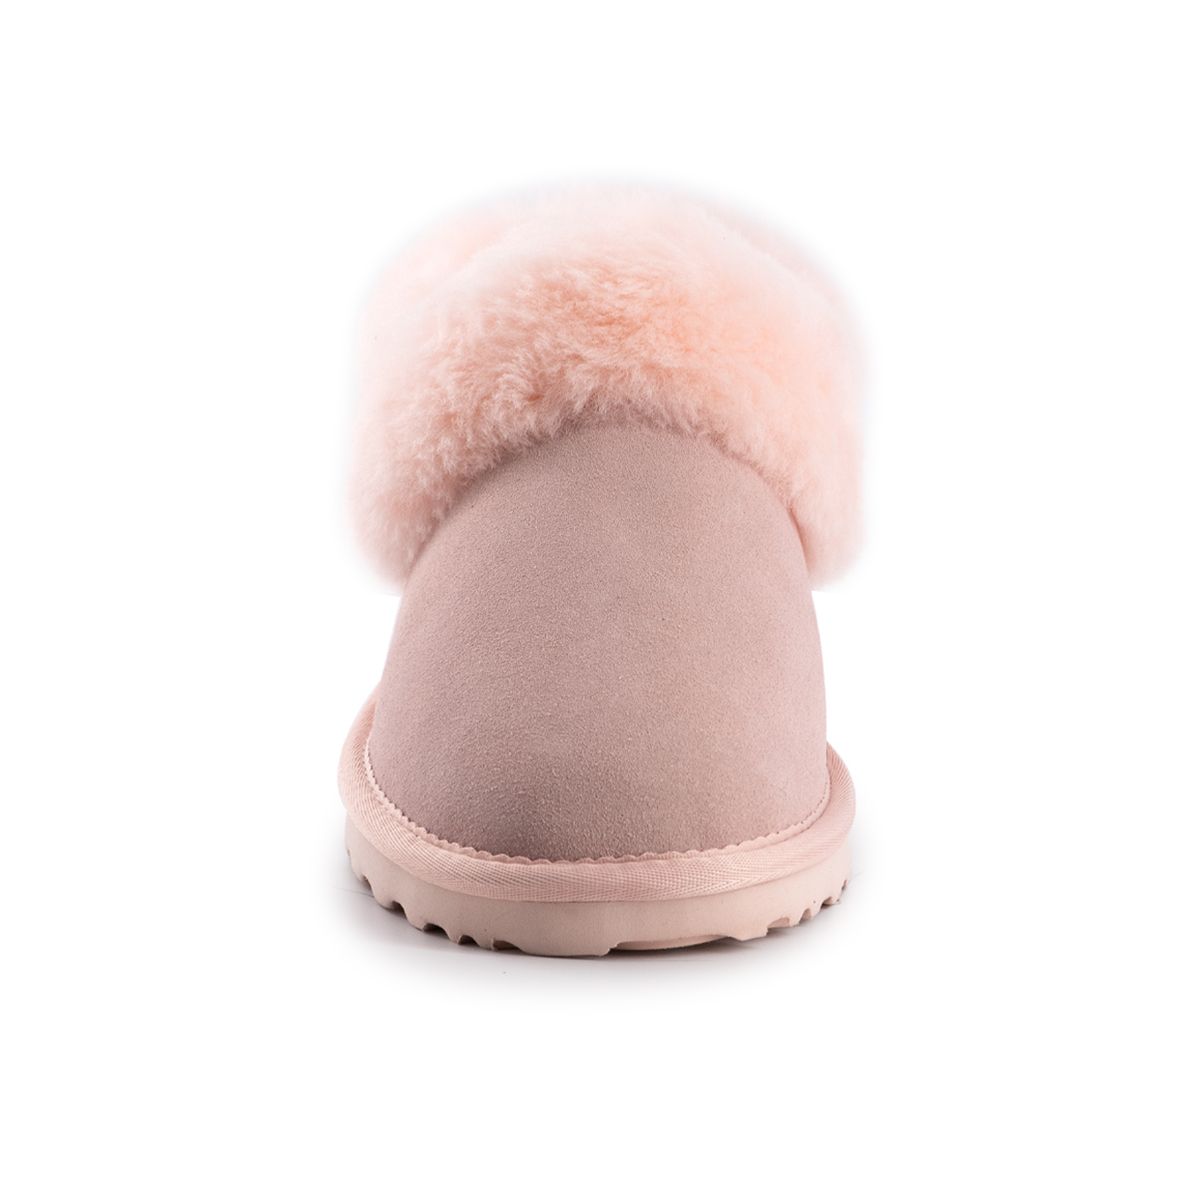 DETAILS    This traditional Ankle slipper for built comfort and support. The added sheepskin collar allows for that extra warmth, still providing a stylish look.  Traditional slipper you will wear all year round Plush premium Australian sheepskin lining Water resisPALEPINKt Leather Upper  Full Australian sheepskin insole Stylish looking sheepskin collar Light weight EVA, rubber blend outsole - soft and extra cushioning  Sheepskin breathes allowing feet to stay warm in winter and cool in summer 100% brand new and high quality, comes in a branded box, suitable for gift